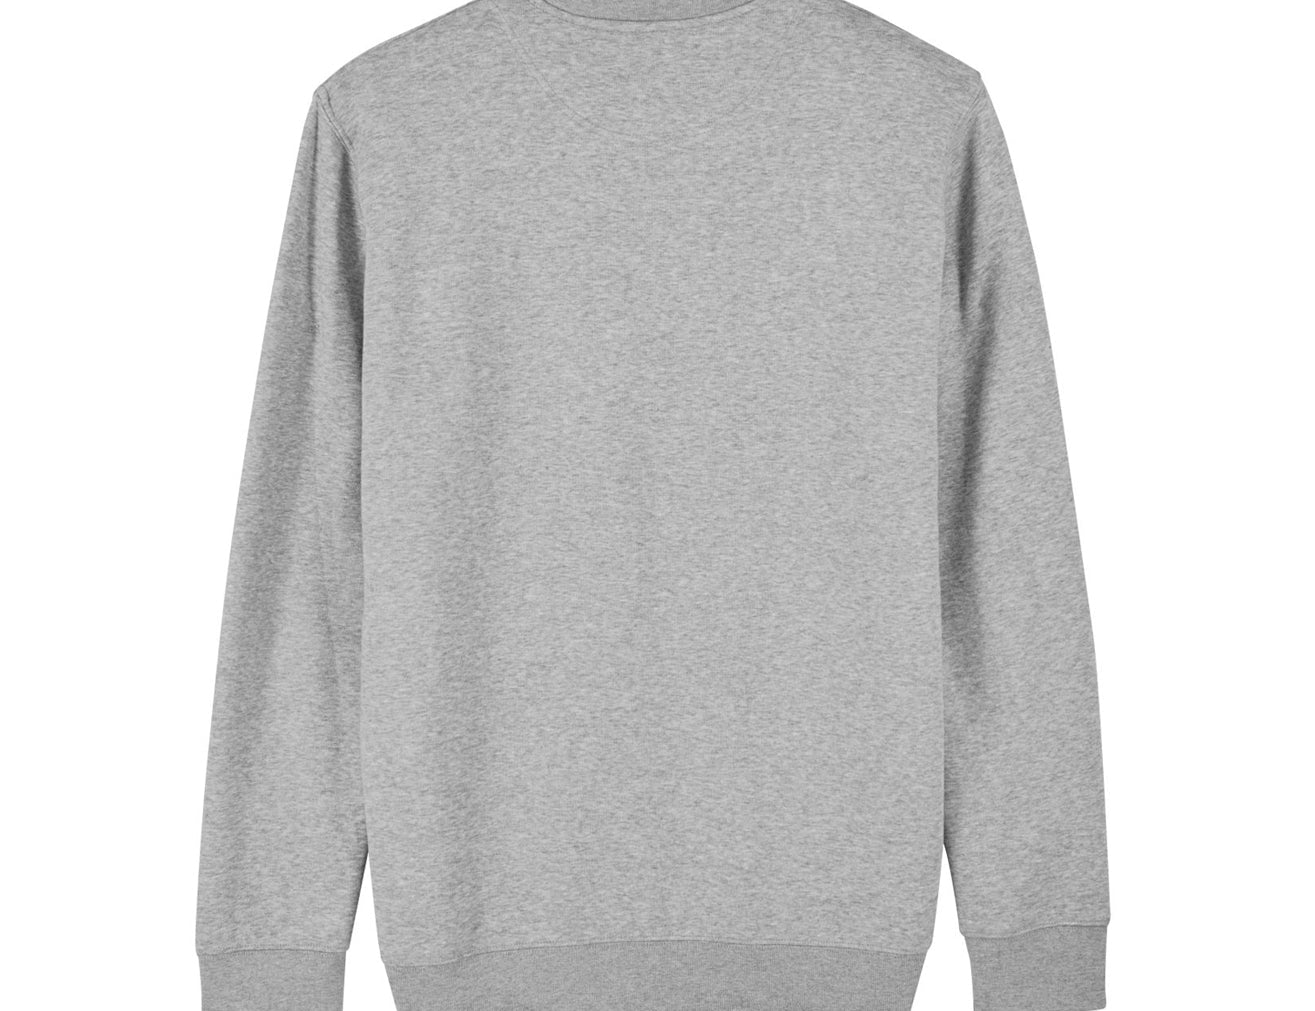 PlanetAir in Heather Grey - ONETURTLE